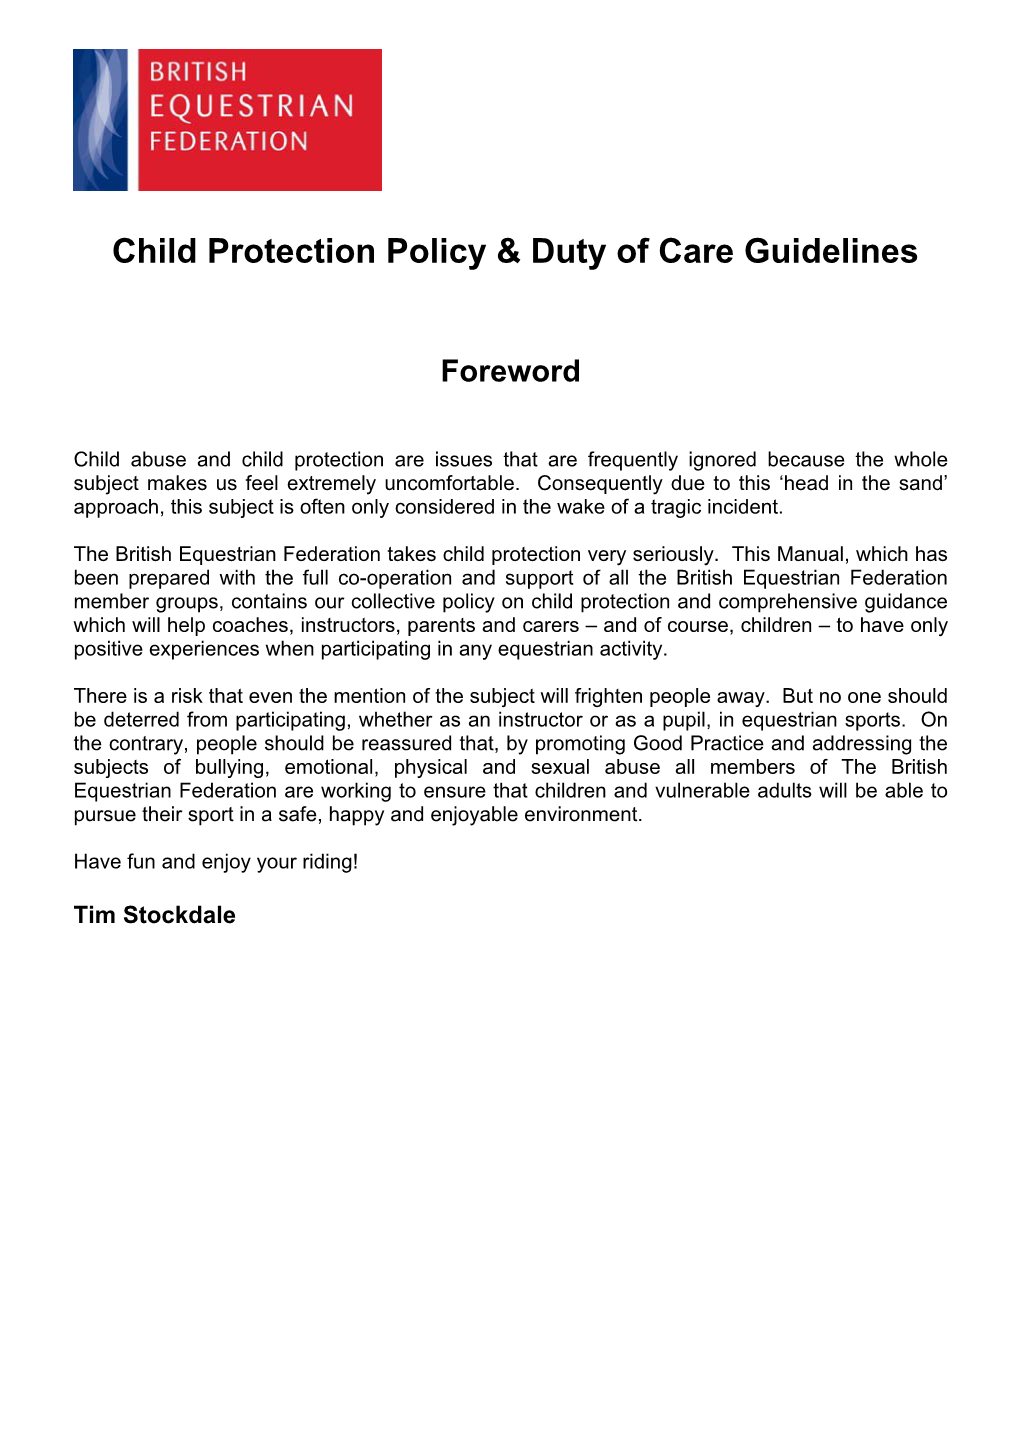 Child Protection Policy & Duty of Care Guidelines